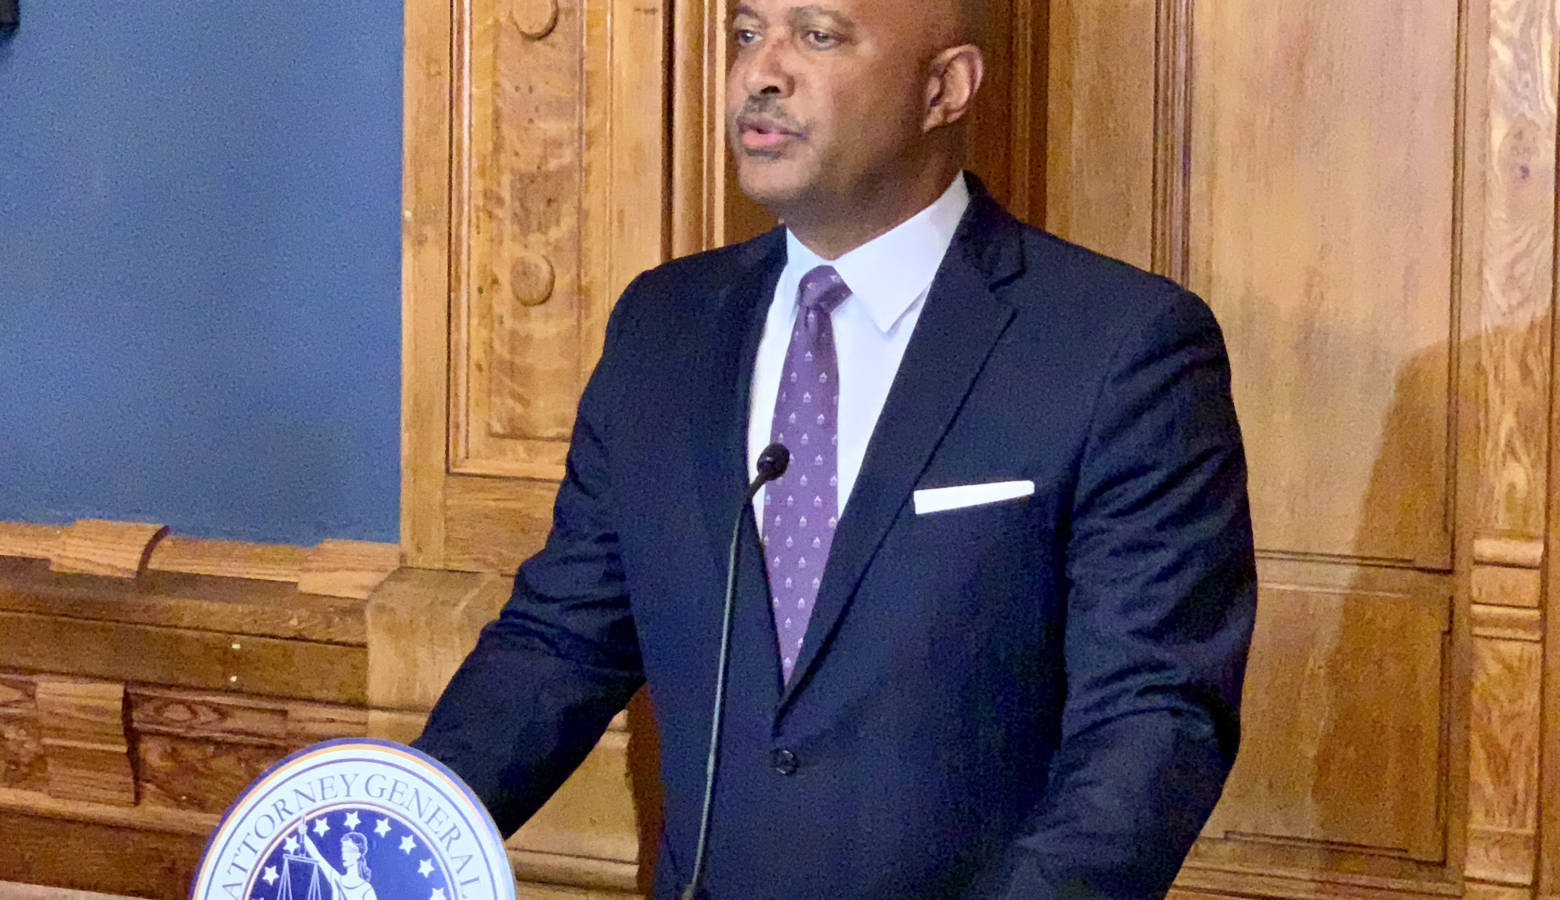 Attorney General Curtis Hill discusses the investigation into decreased, former Indiana physician Ulrich Klopfer. (Brandon Smith/IPB News)